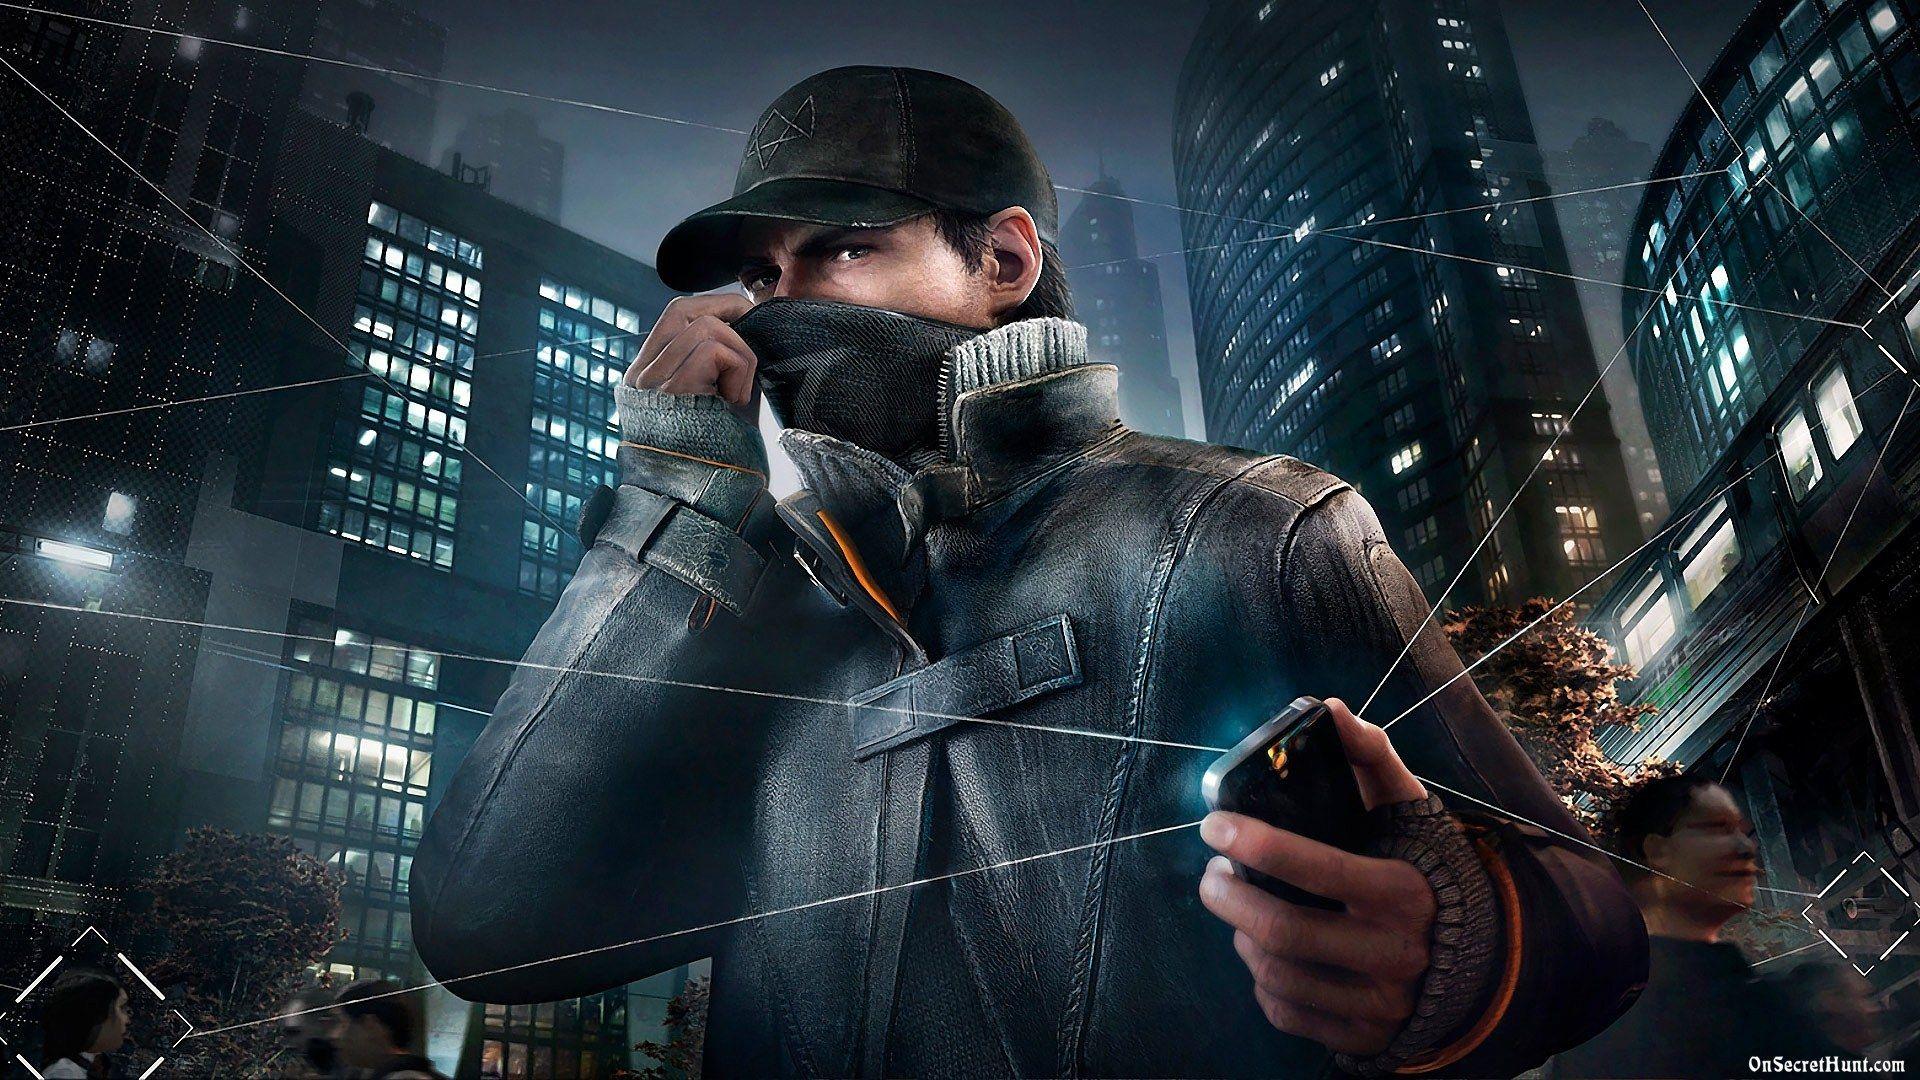 Watch Dogs Wallpapers 80 pictures